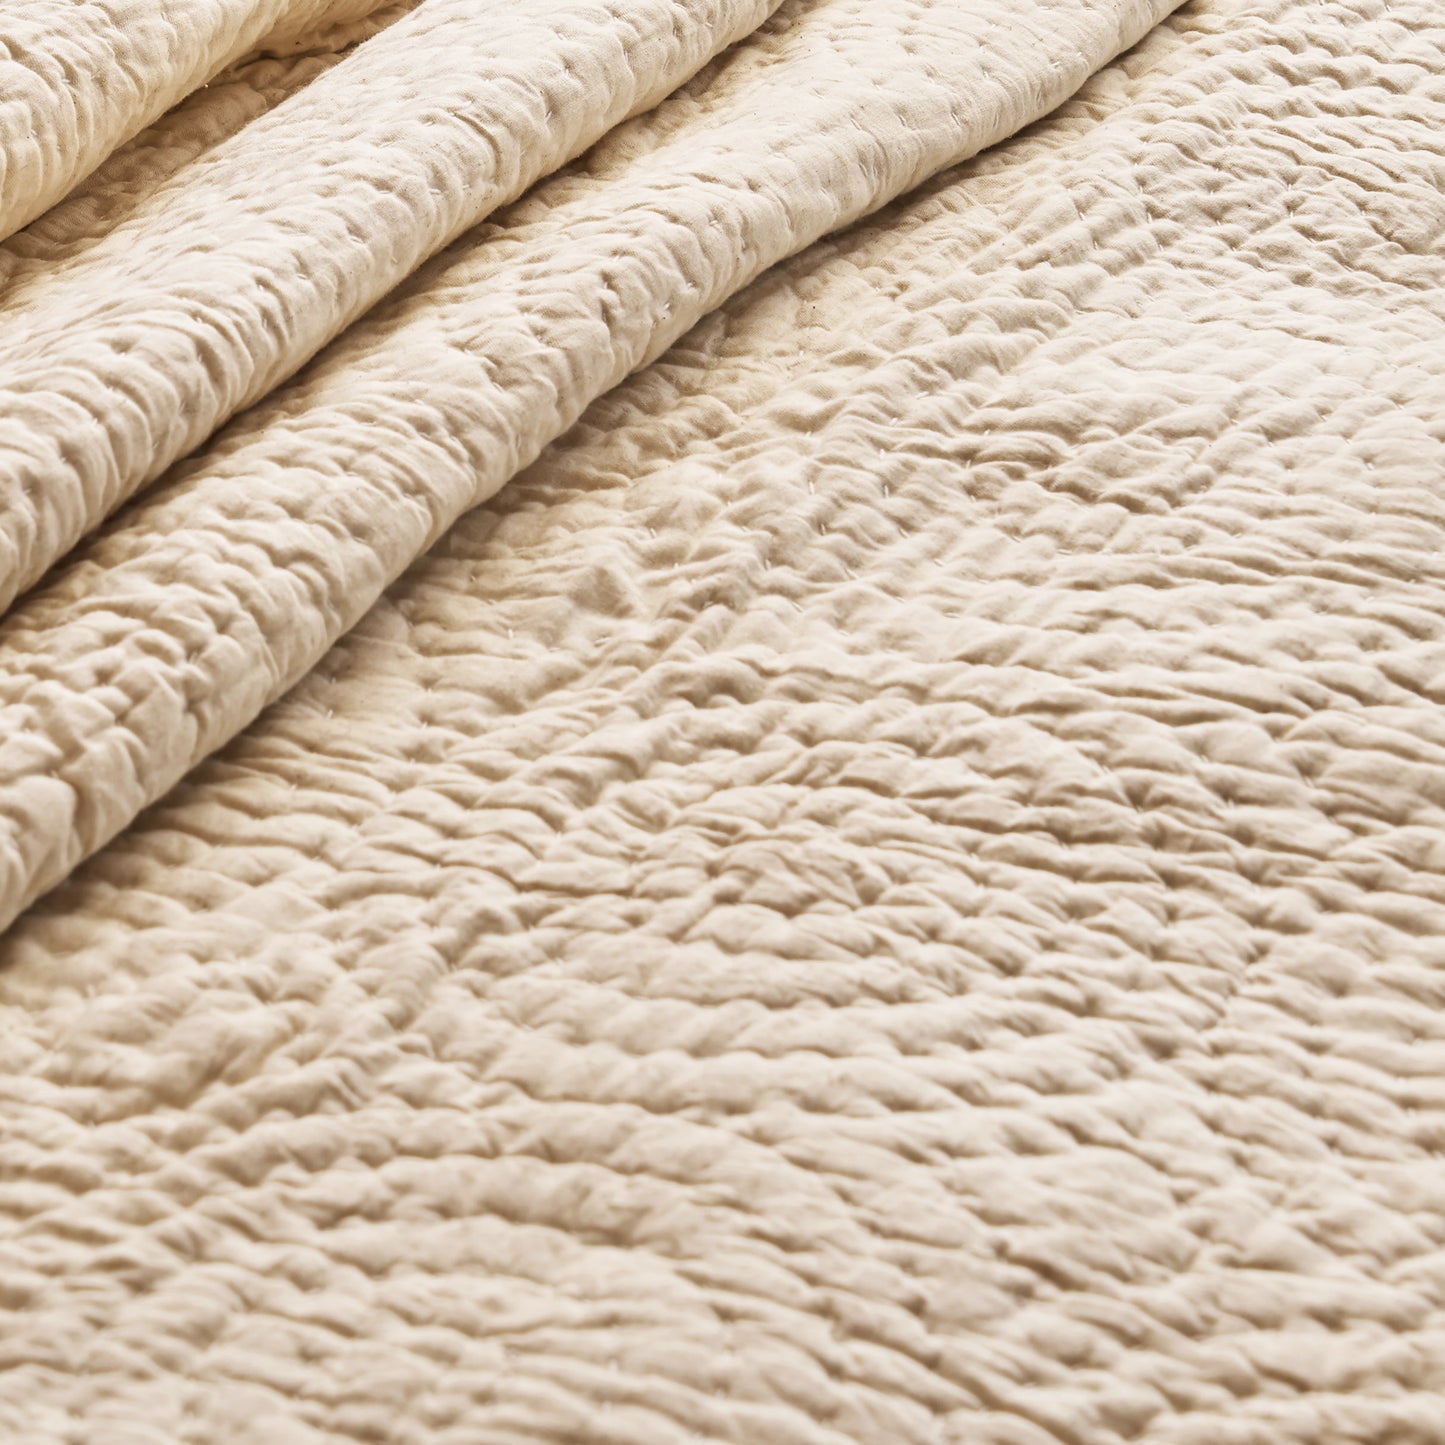 QUILTED BED SET - Beige cotton linen fabric with CIRCLE pattern quilting, Sizes available